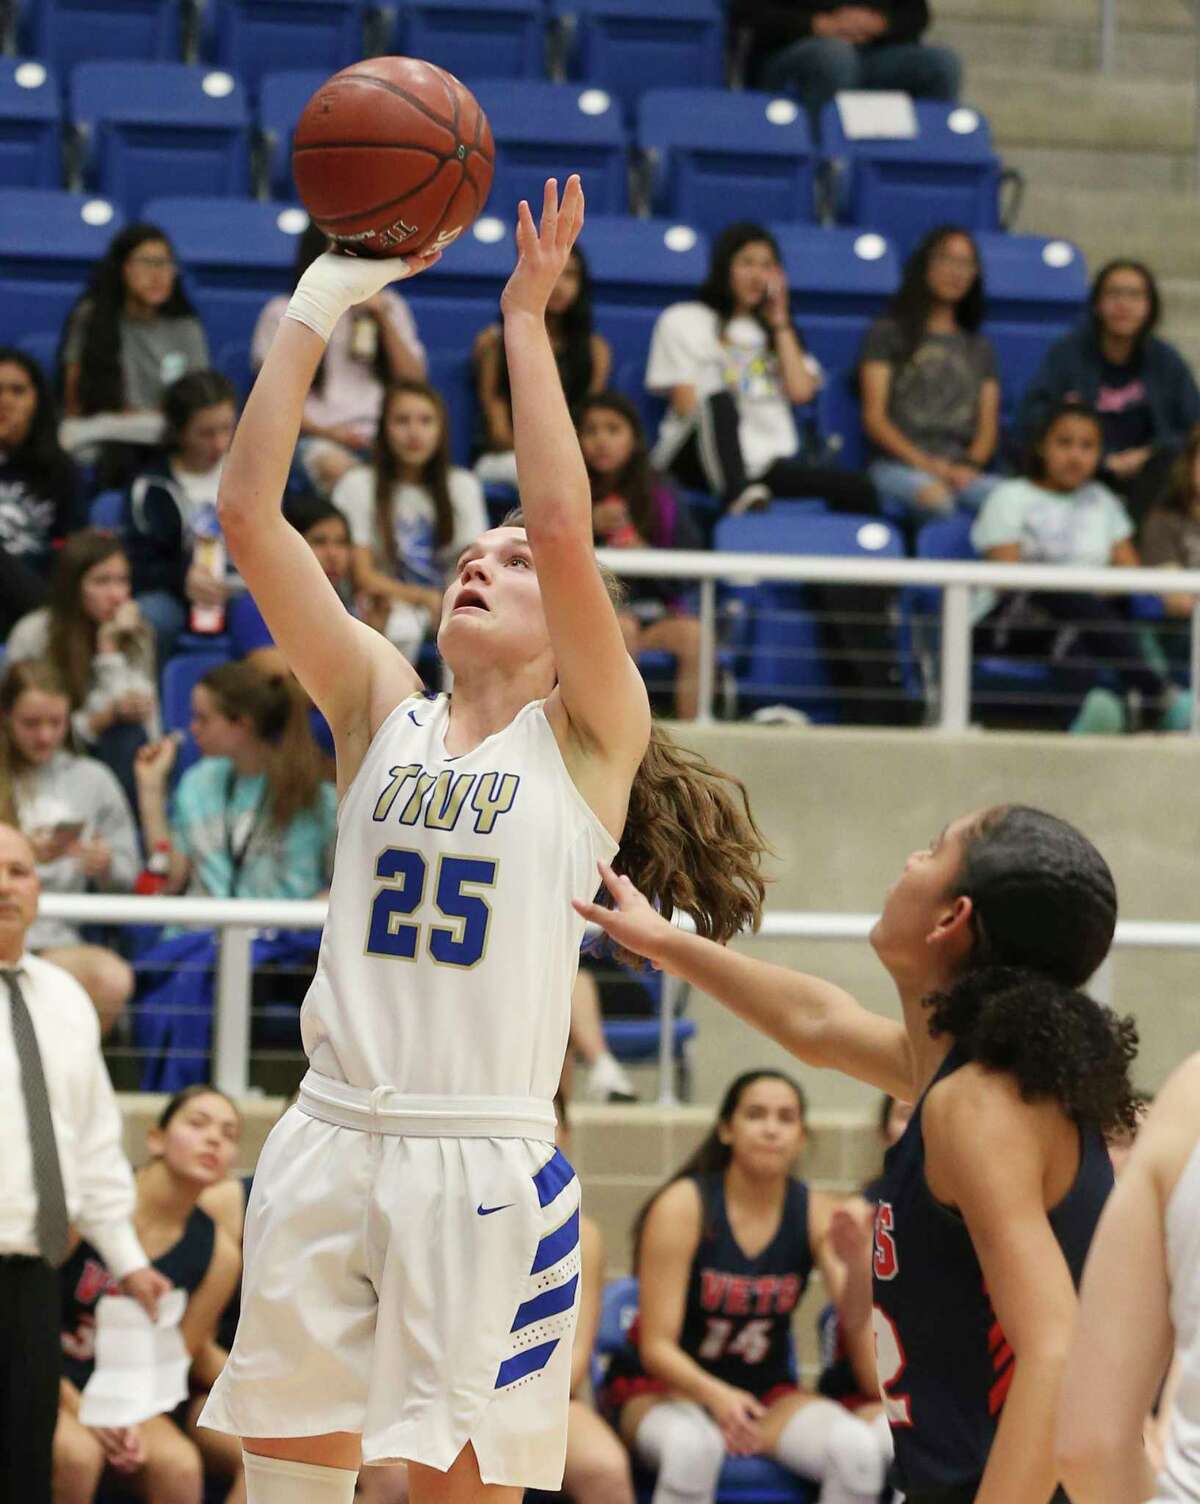 Kerrville Tivy's Ashlee Zirkel (25) scores against Corpus Christi Veterans Memorial's Tatiana Mosley (22) during their Region IV-5A semifinal game on Friday, Feb. 28, 2020.